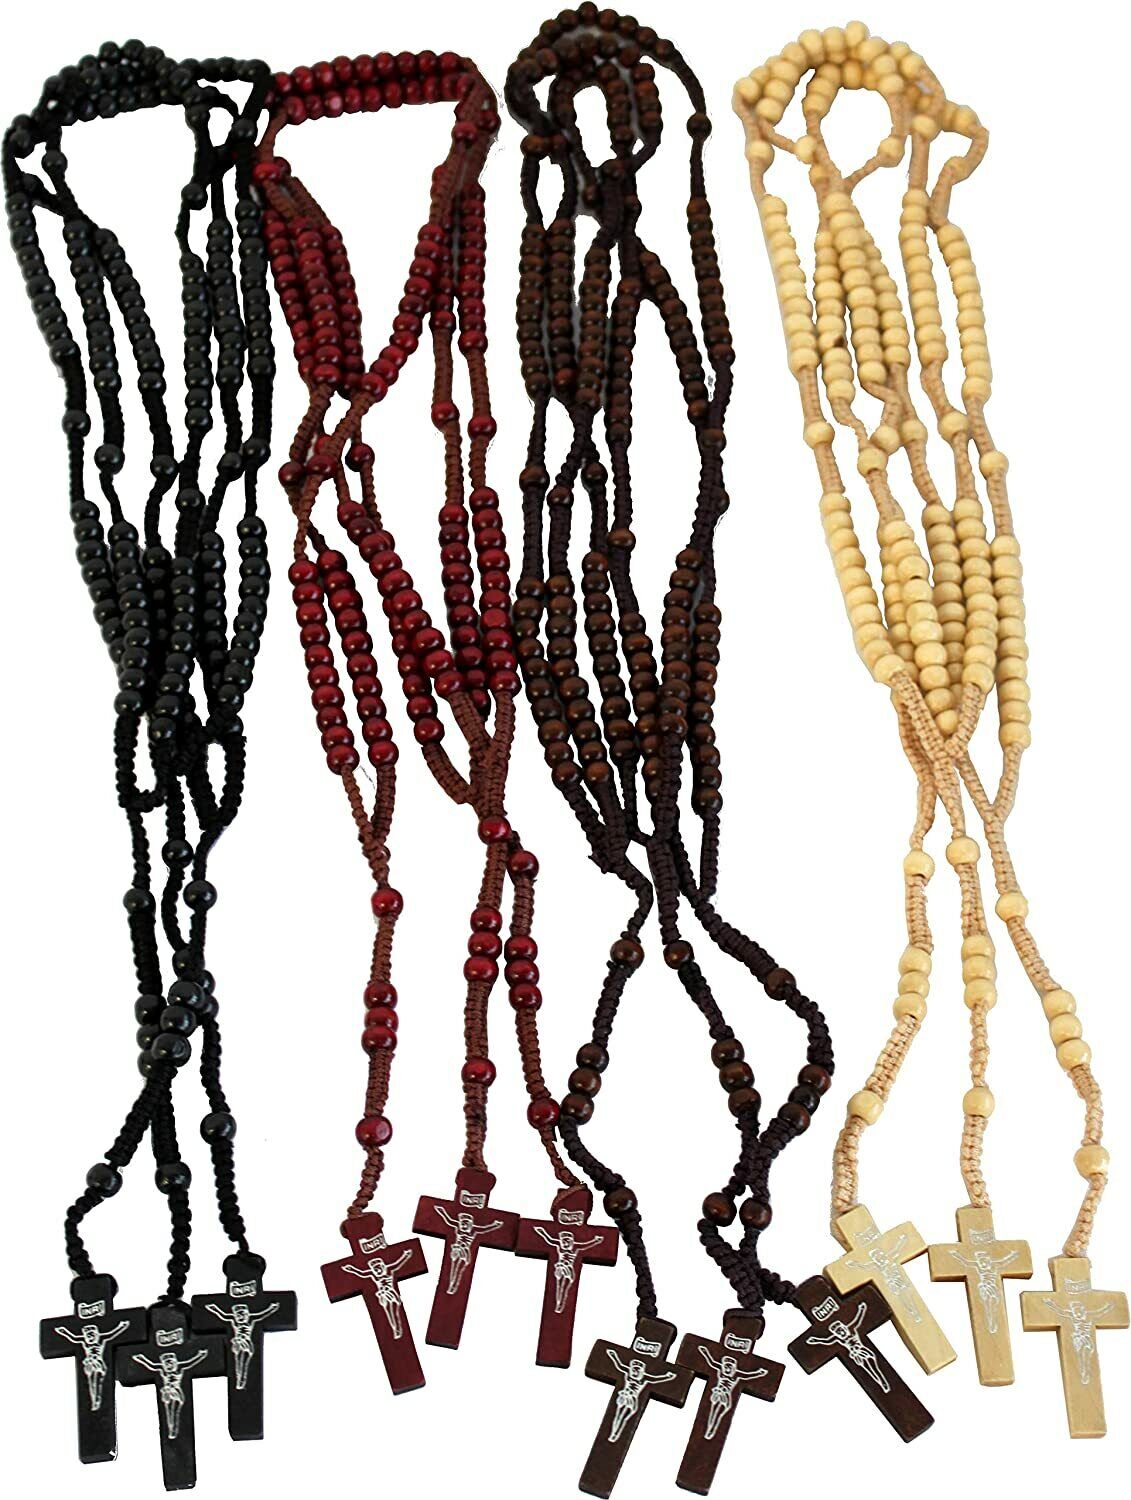 12 x Wholesale Bulk Wooden Rosary Necklace for Baptism, Wedding, Memorial Gift